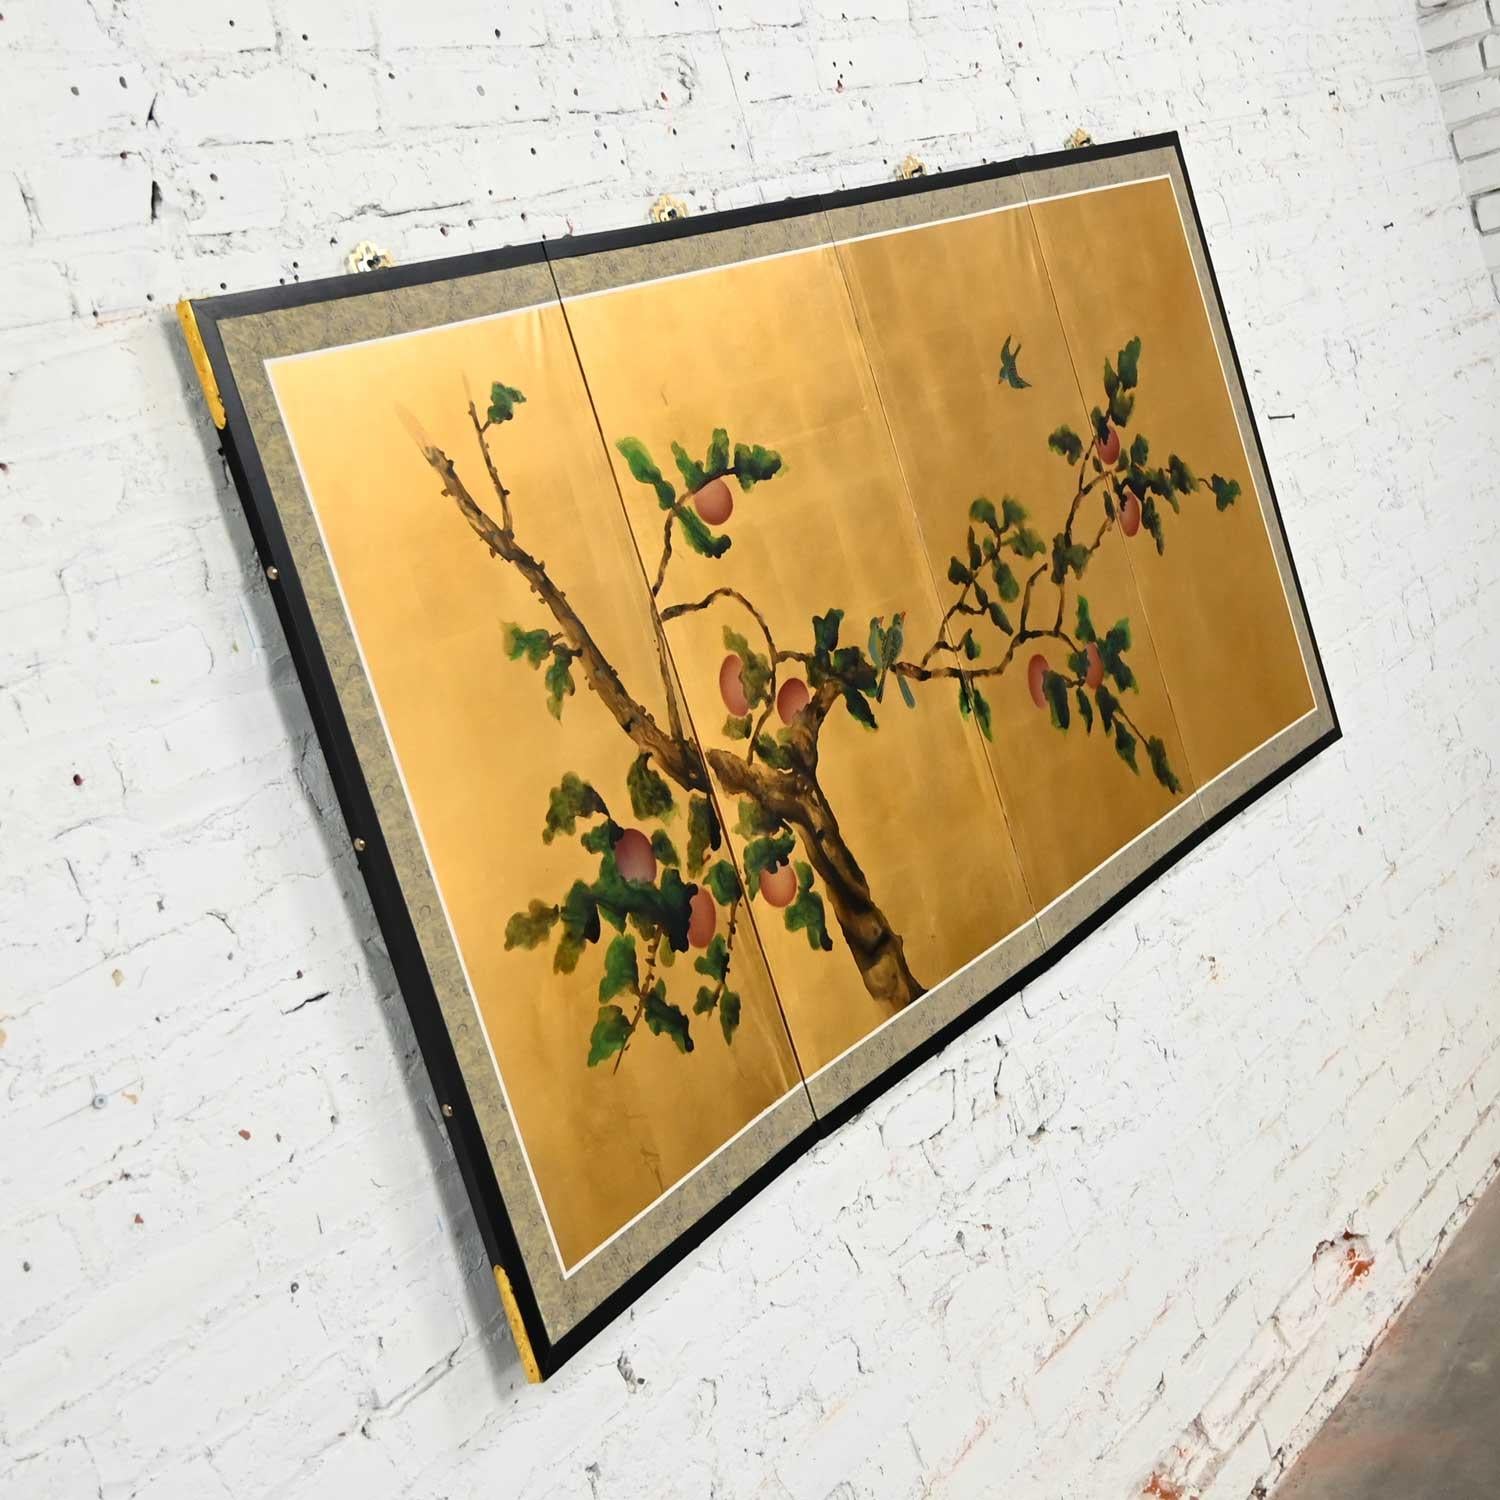 Japanese Chinoiserie Asian 4 Panel Silk Byobu Folding Screen or Wall Hanging Brass Accent